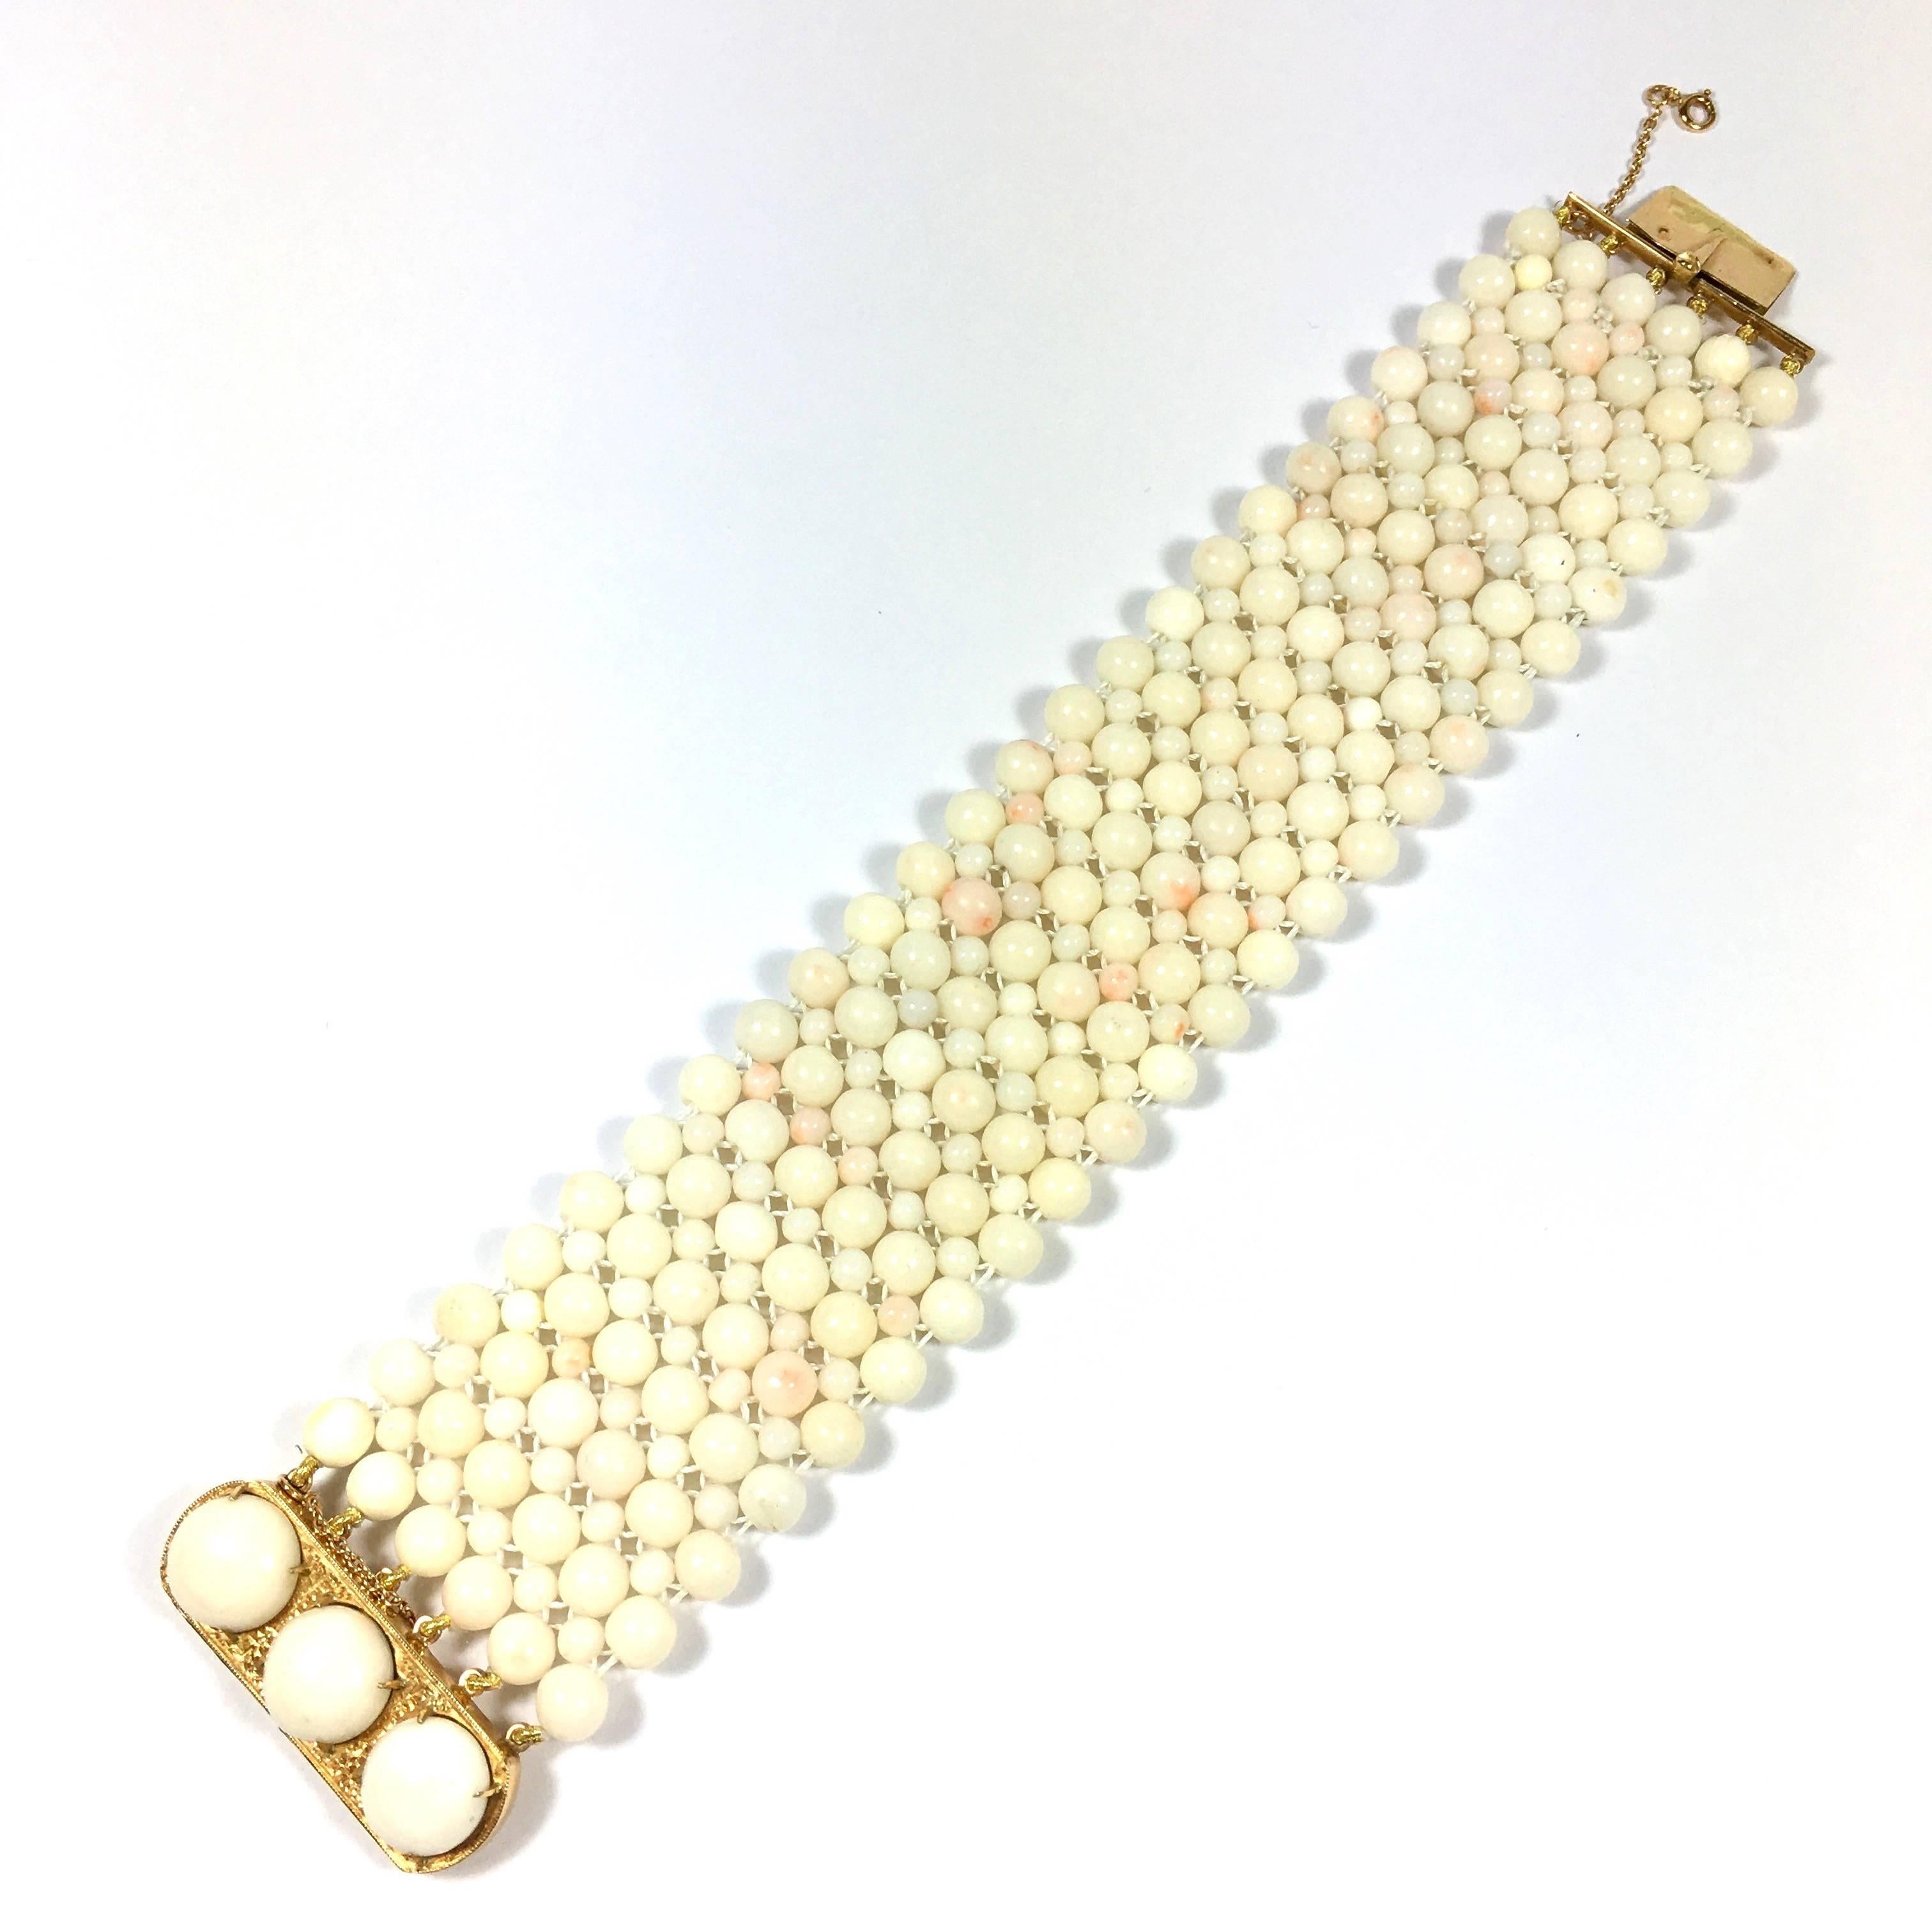 Gorgeous coral bracelet, composed of 6 rows of 6 mm coral beads with 3.5 mm beads in between. 18k yellow gold clasp set with three 11 mm corals and stamped with the french import hallmark (owl) and 75 for the Paris assay office. 